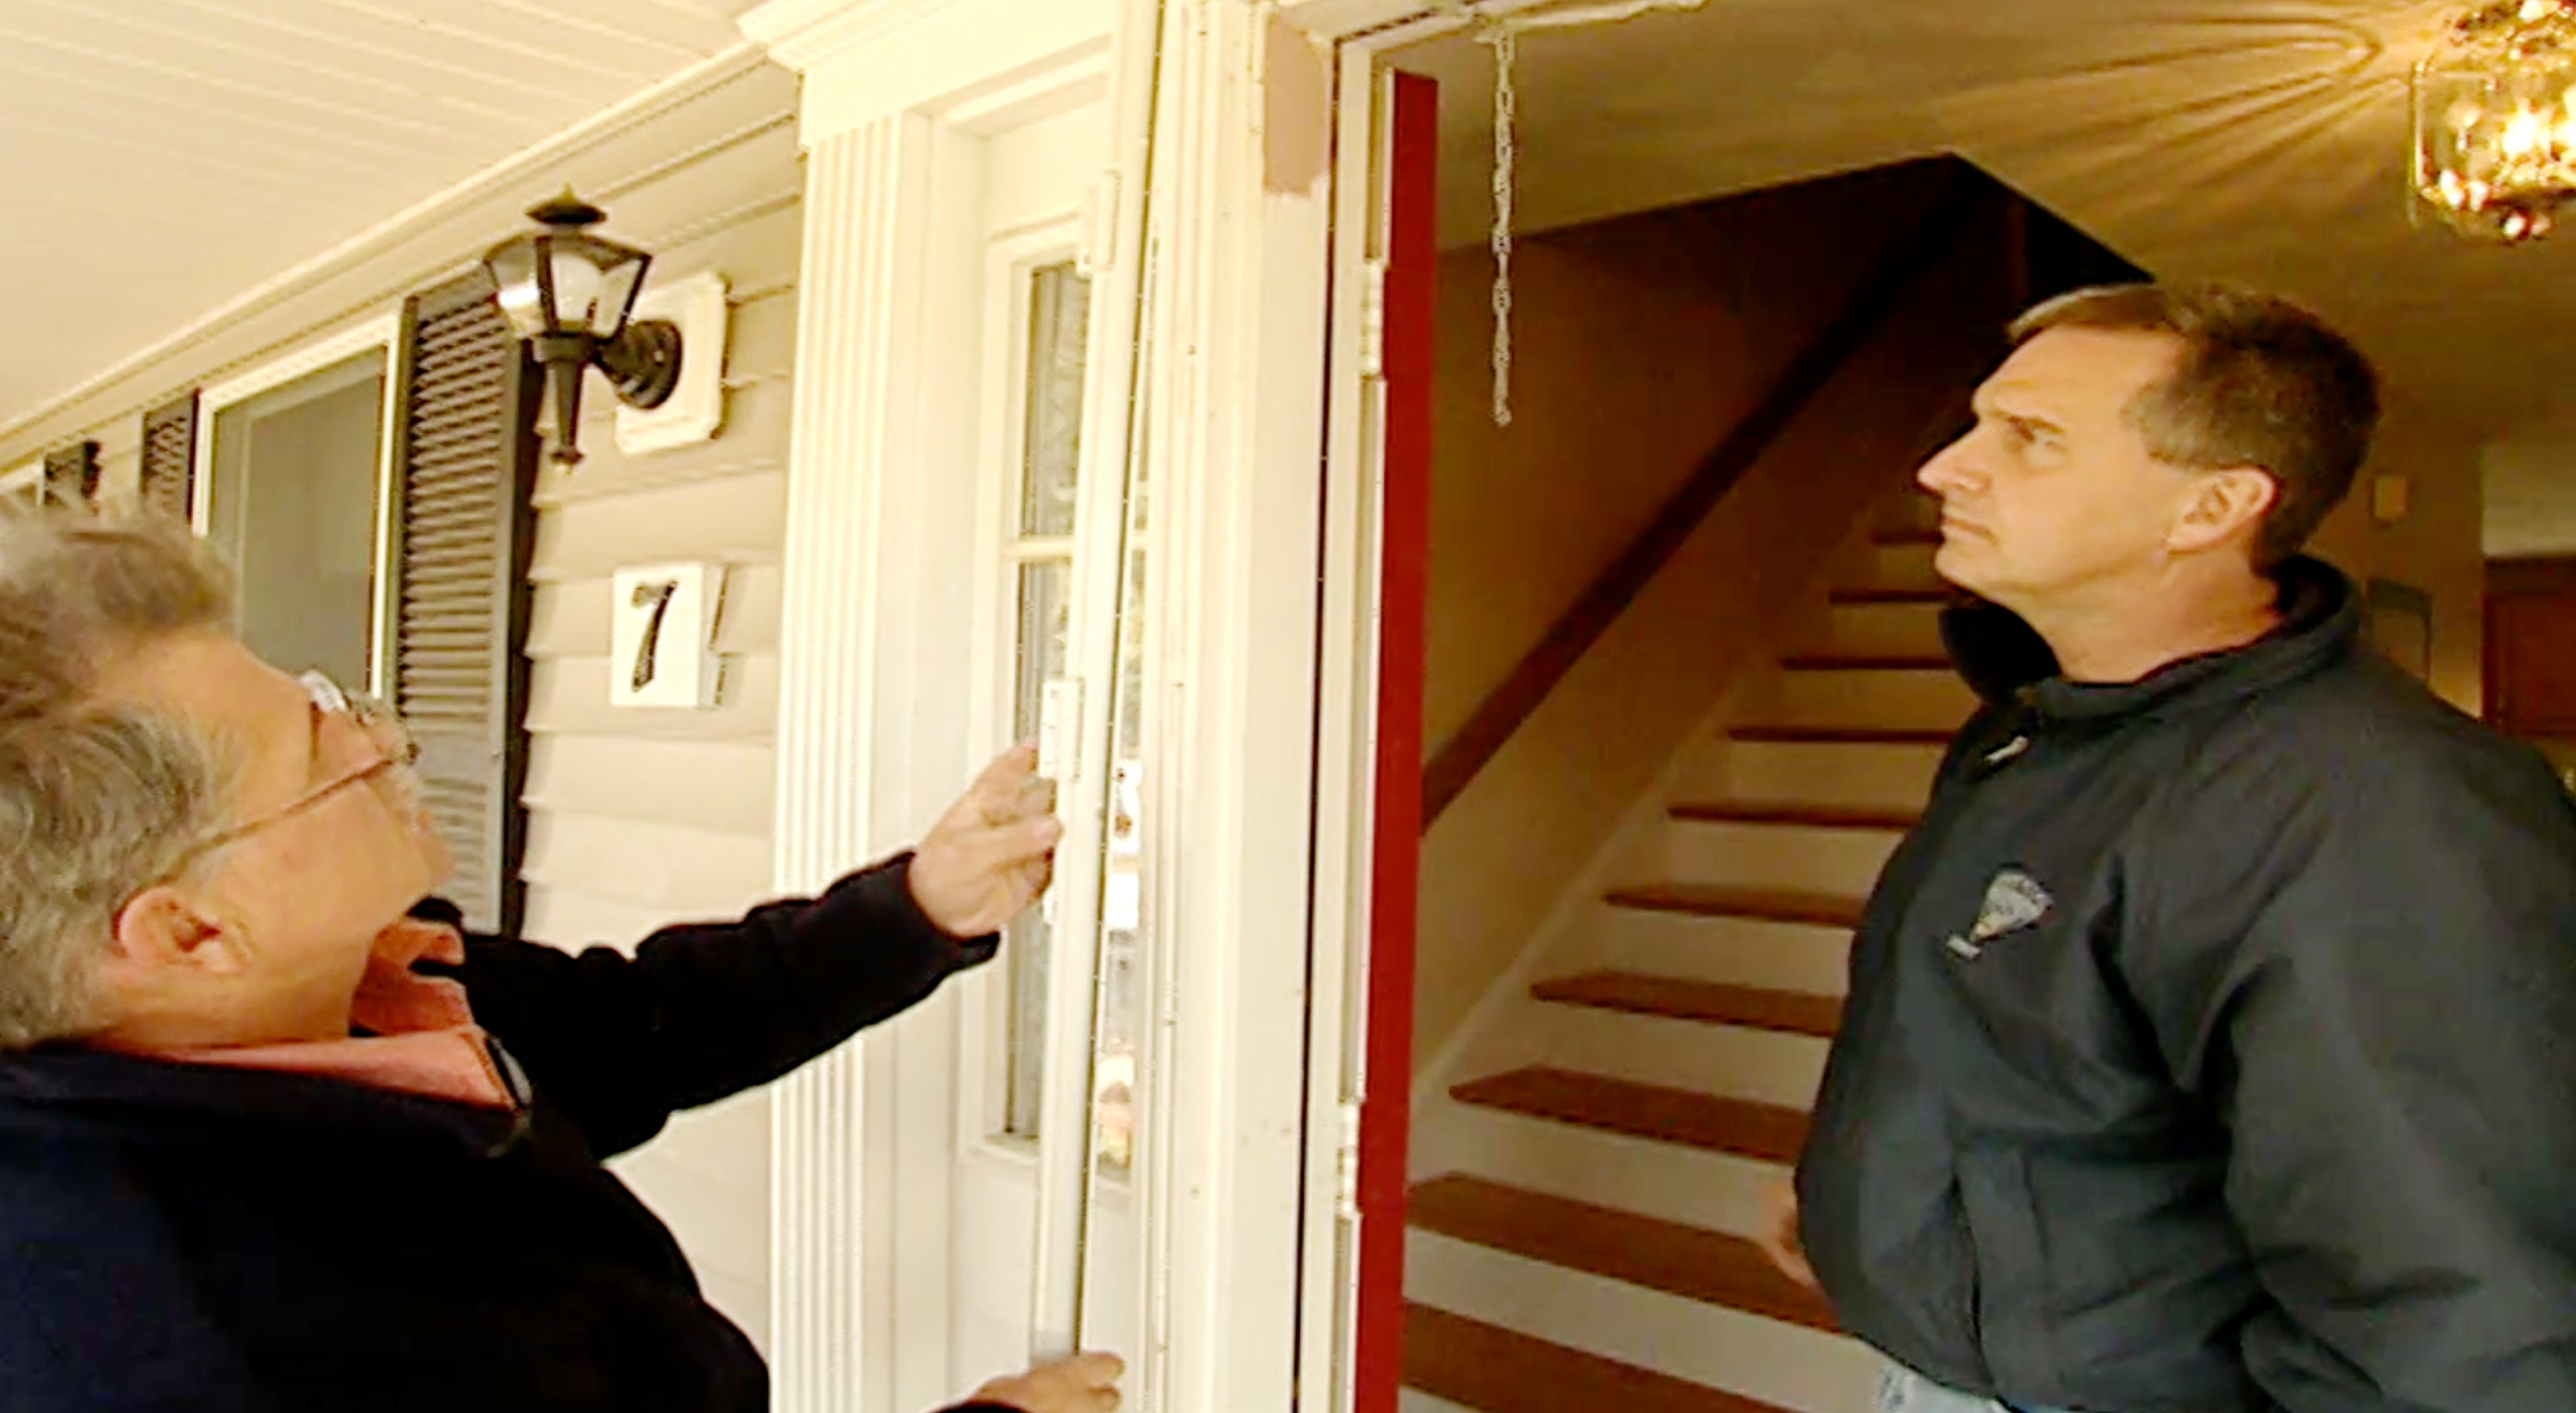 Two people inspect a frosted screen door.